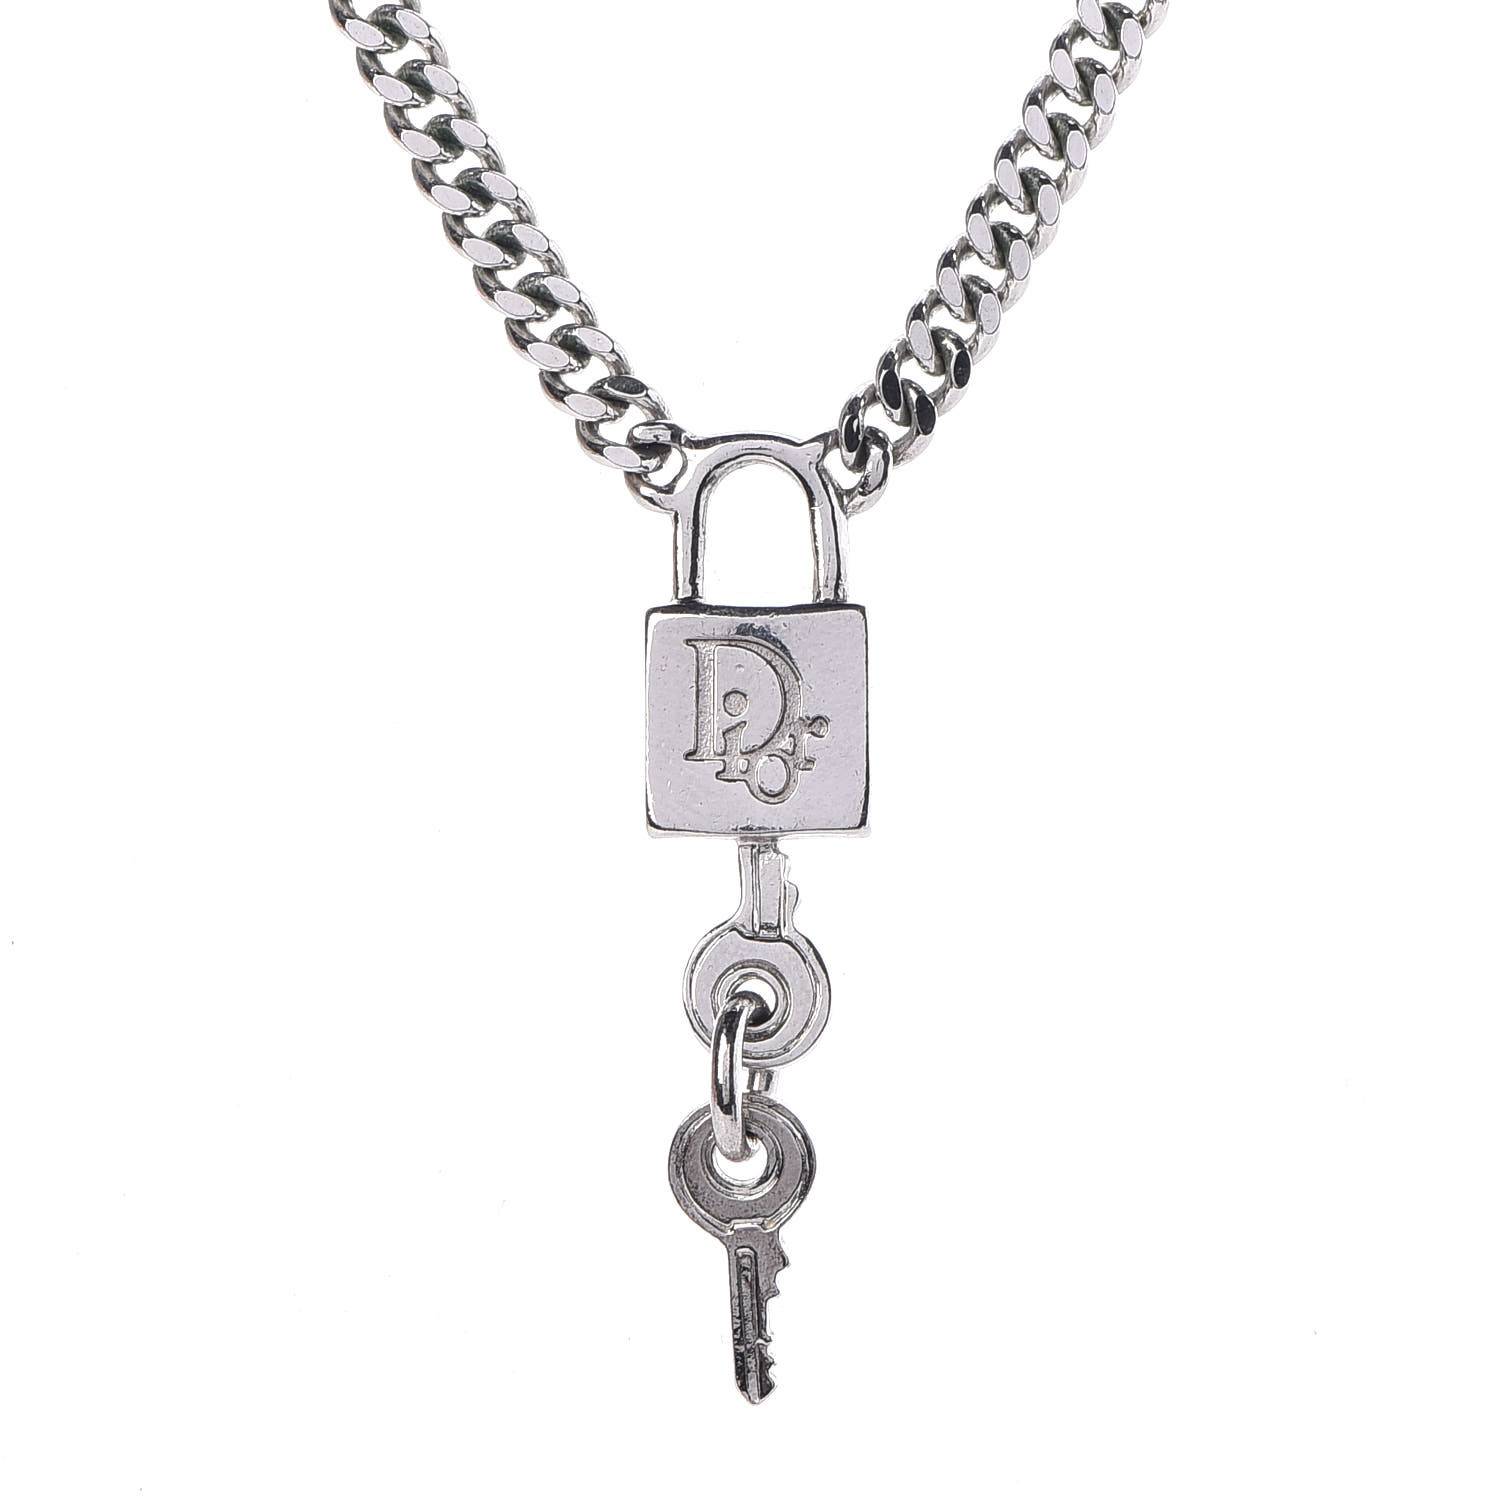 dior necklace with lock